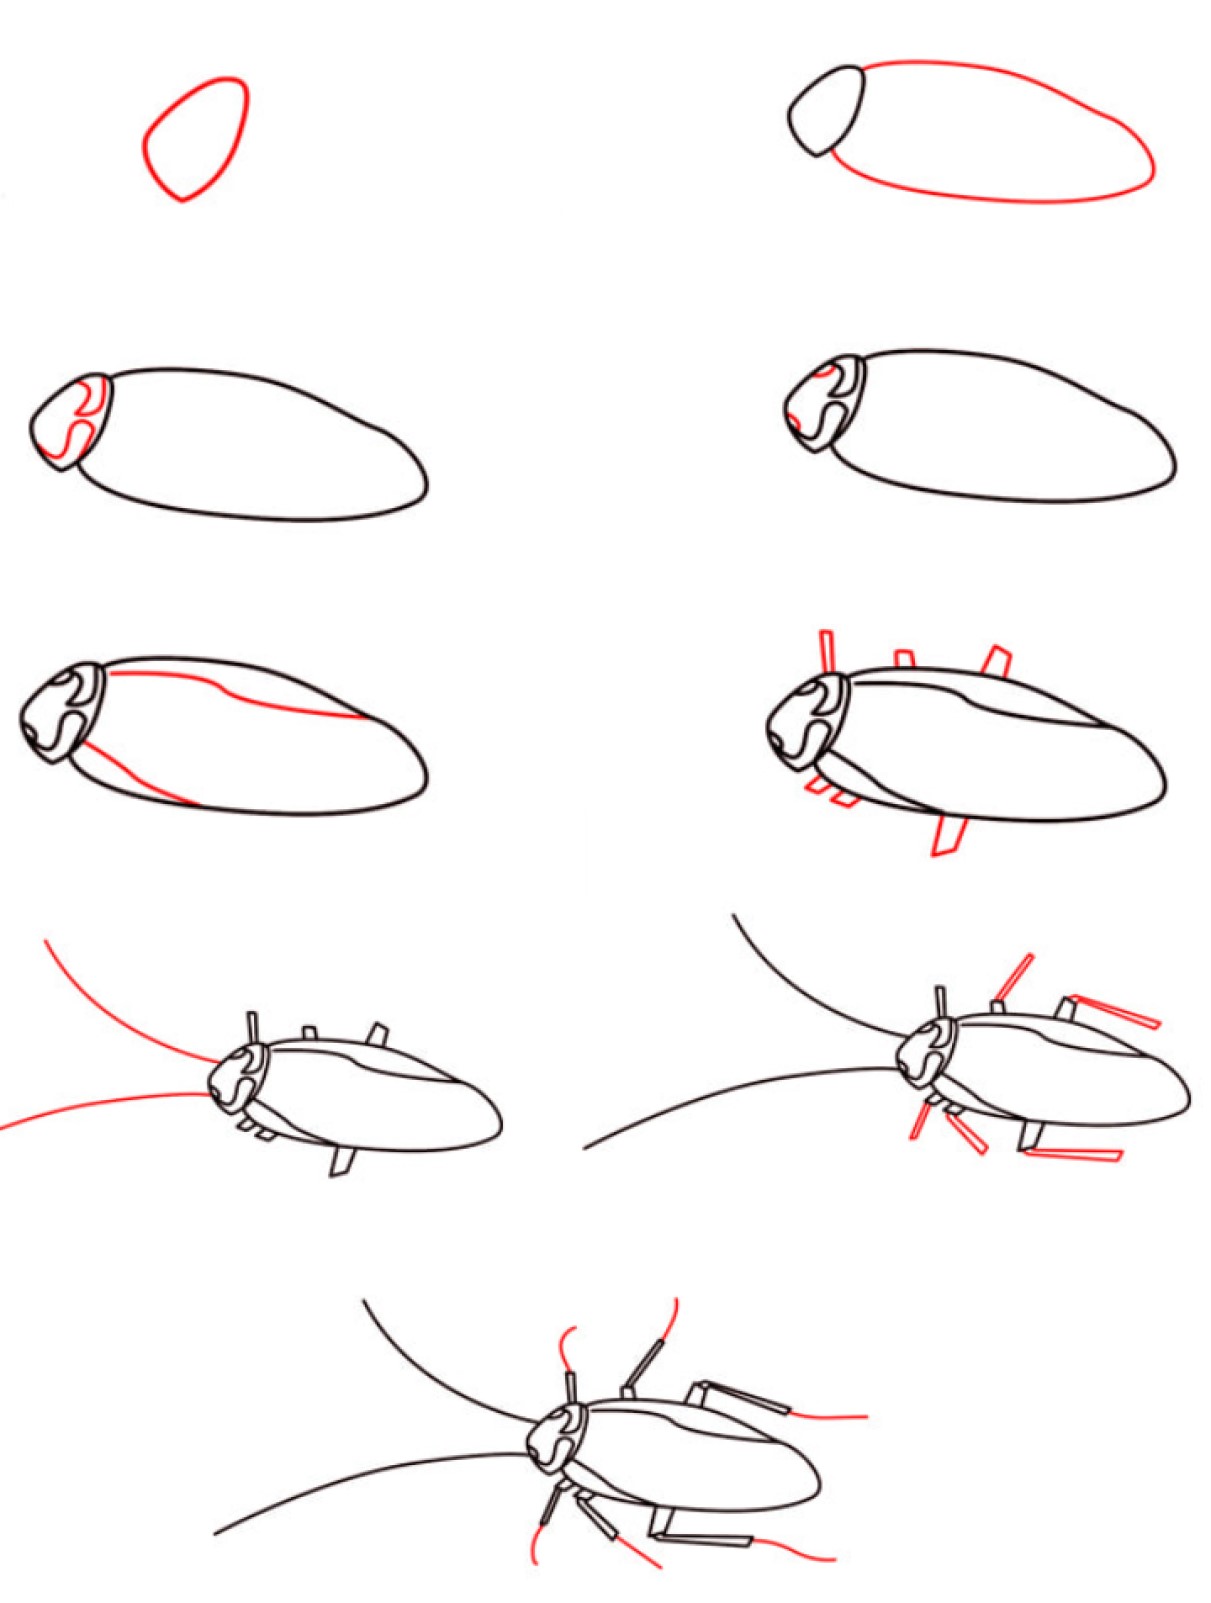 Cockroaches idea 4 Drawing Ideas